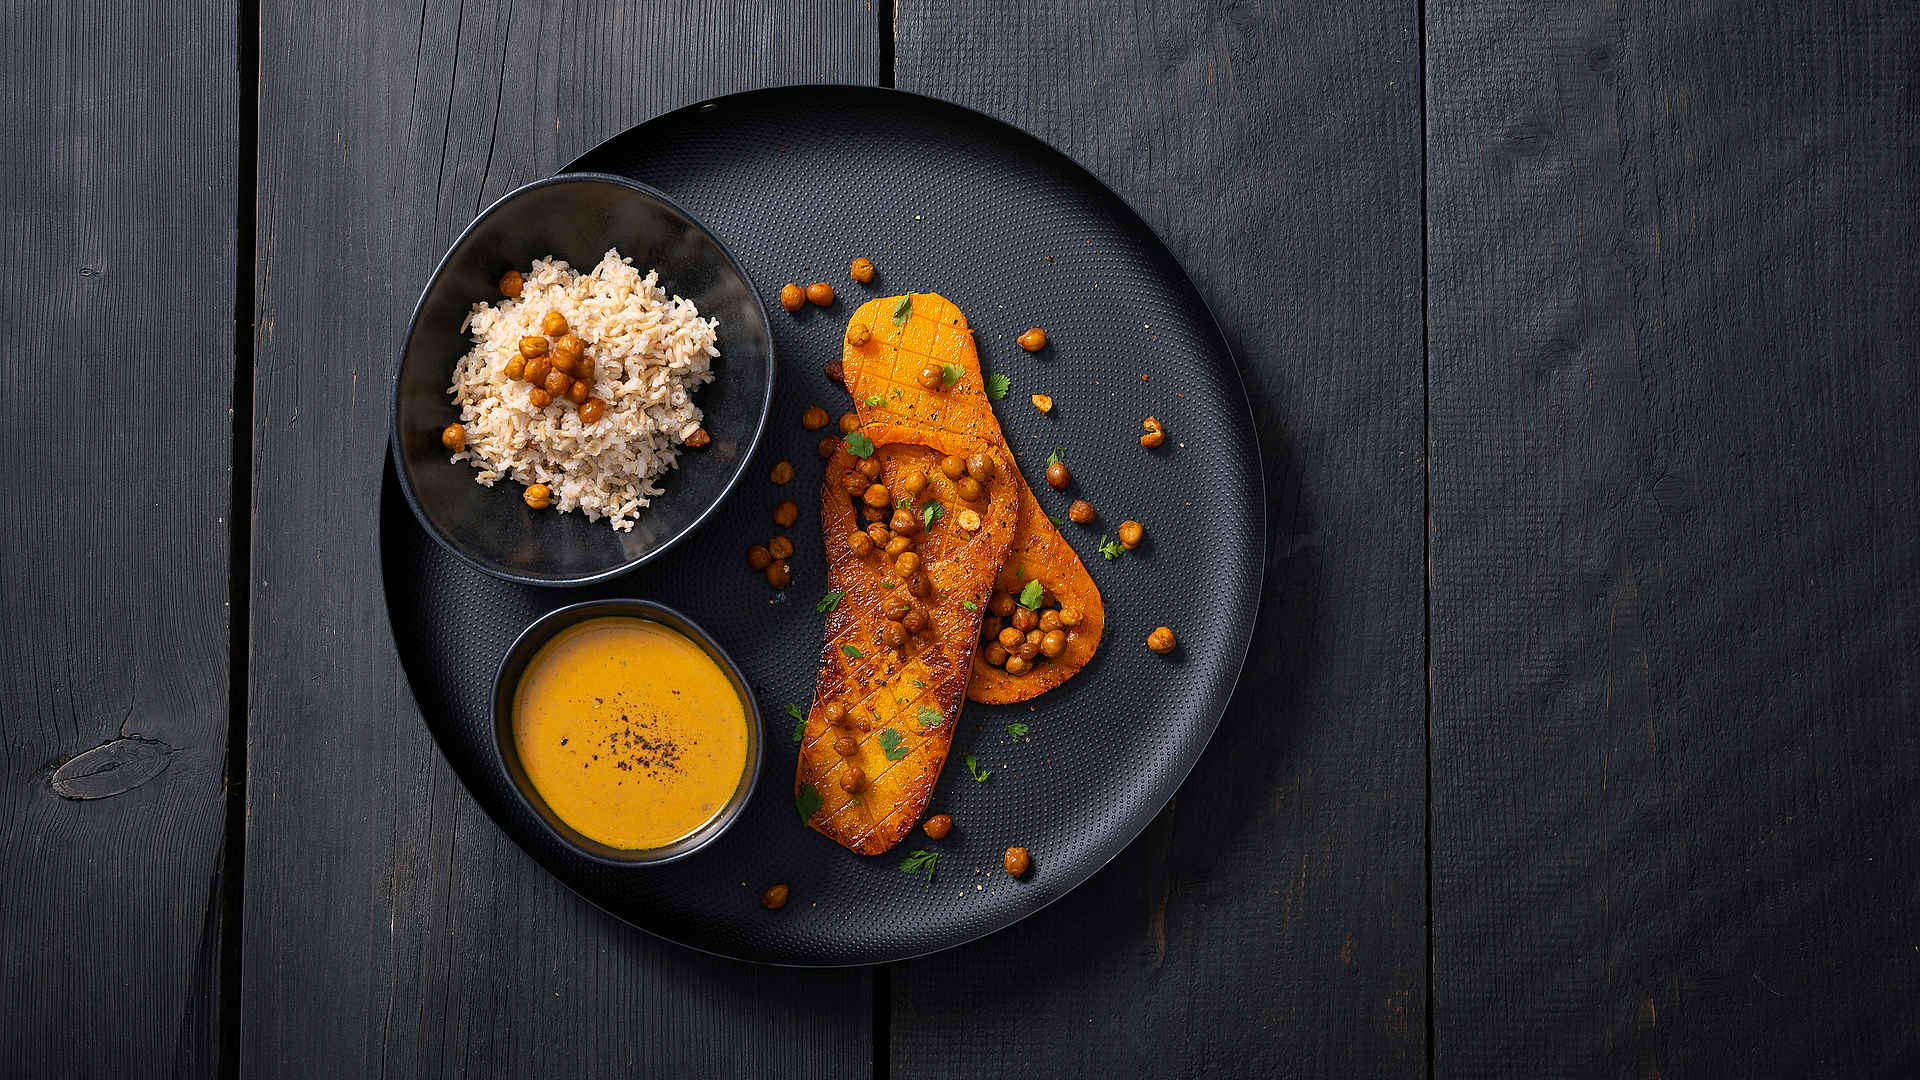 Butternut squash with garam masala sauce and roasted chickpeas